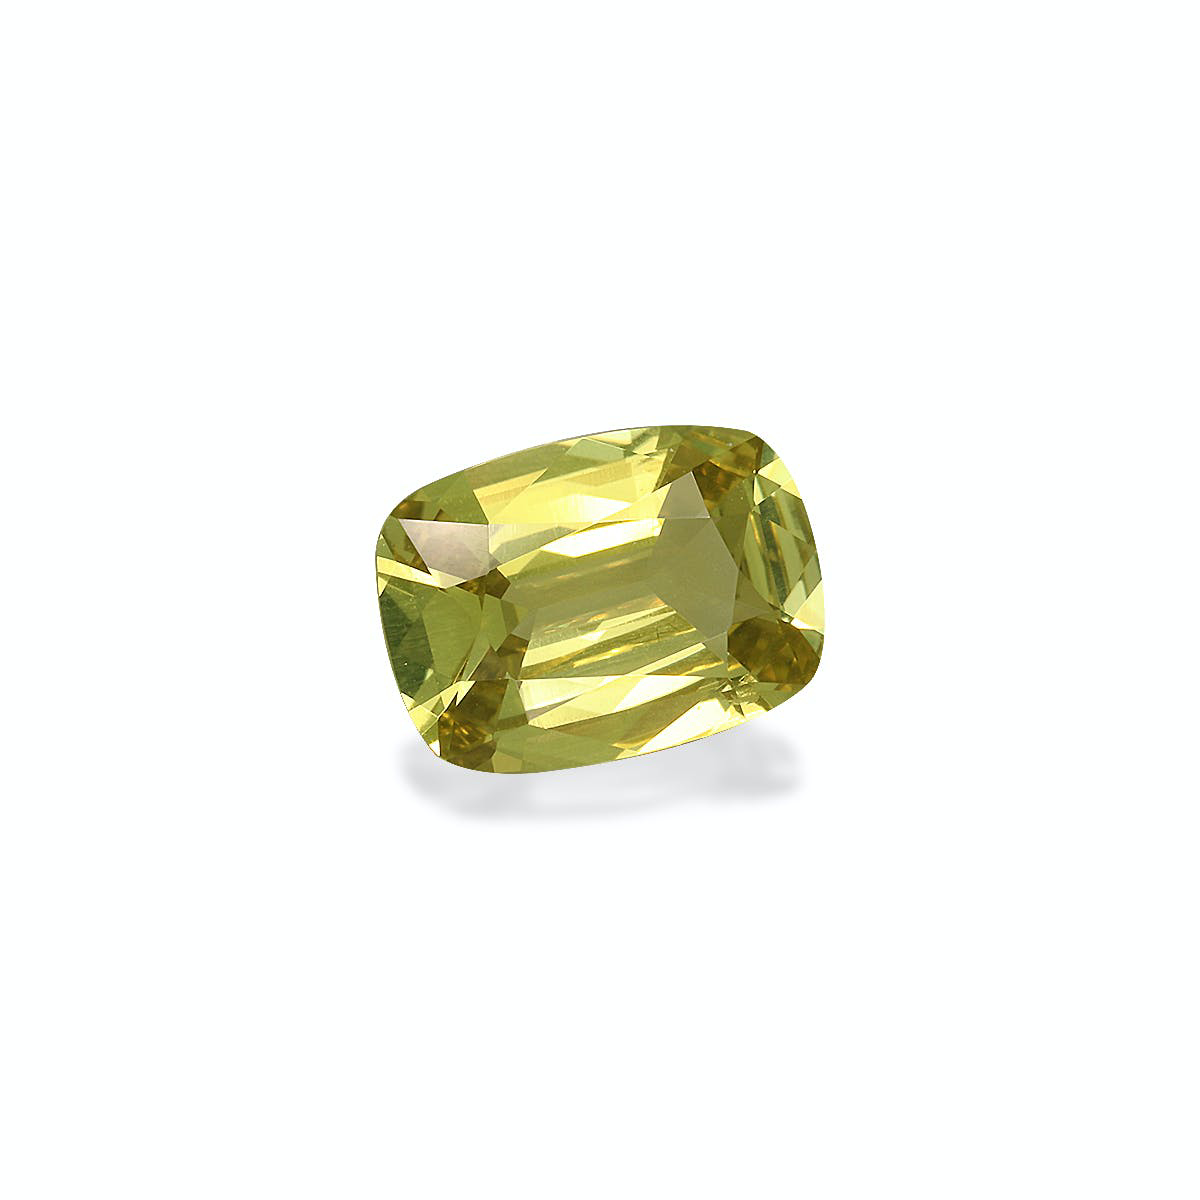 Picture of Golden Yellow Chrysoberyl 2.82ct (CB0146)